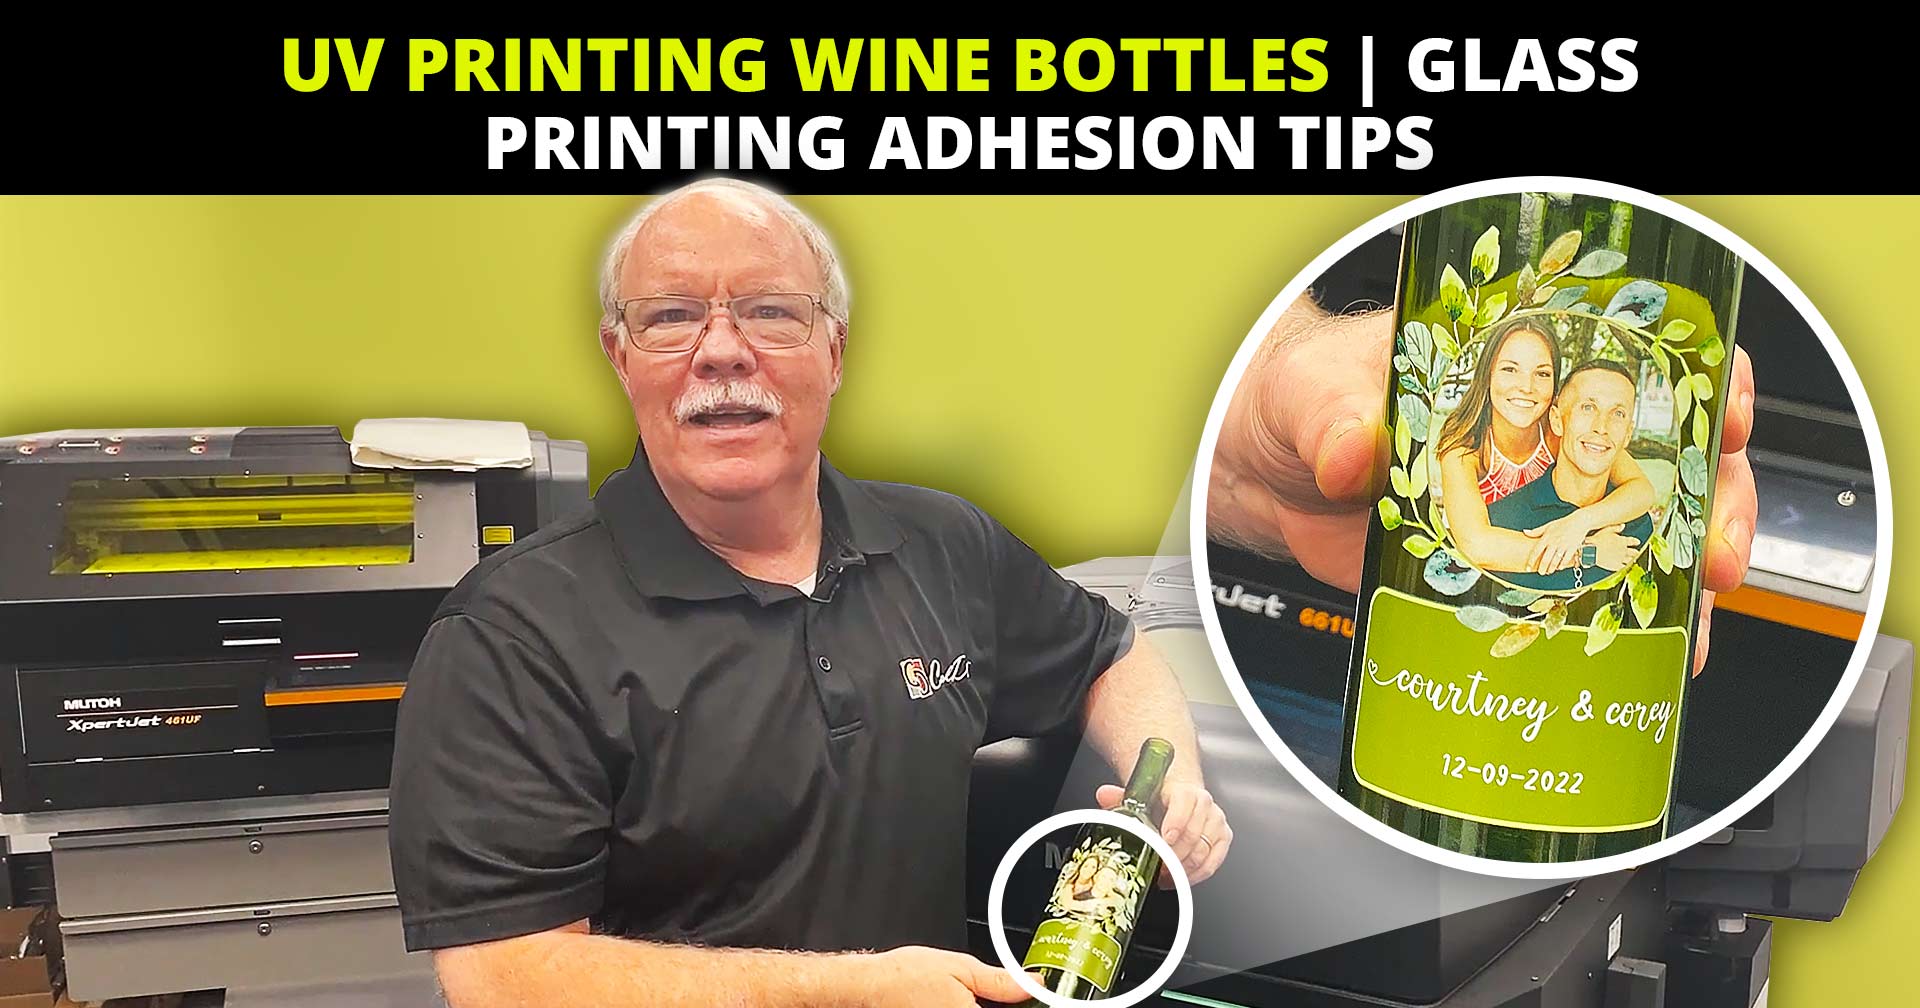 Video Connection | UV Printing Wine Bottles: Glass Printing Adhesion Tips